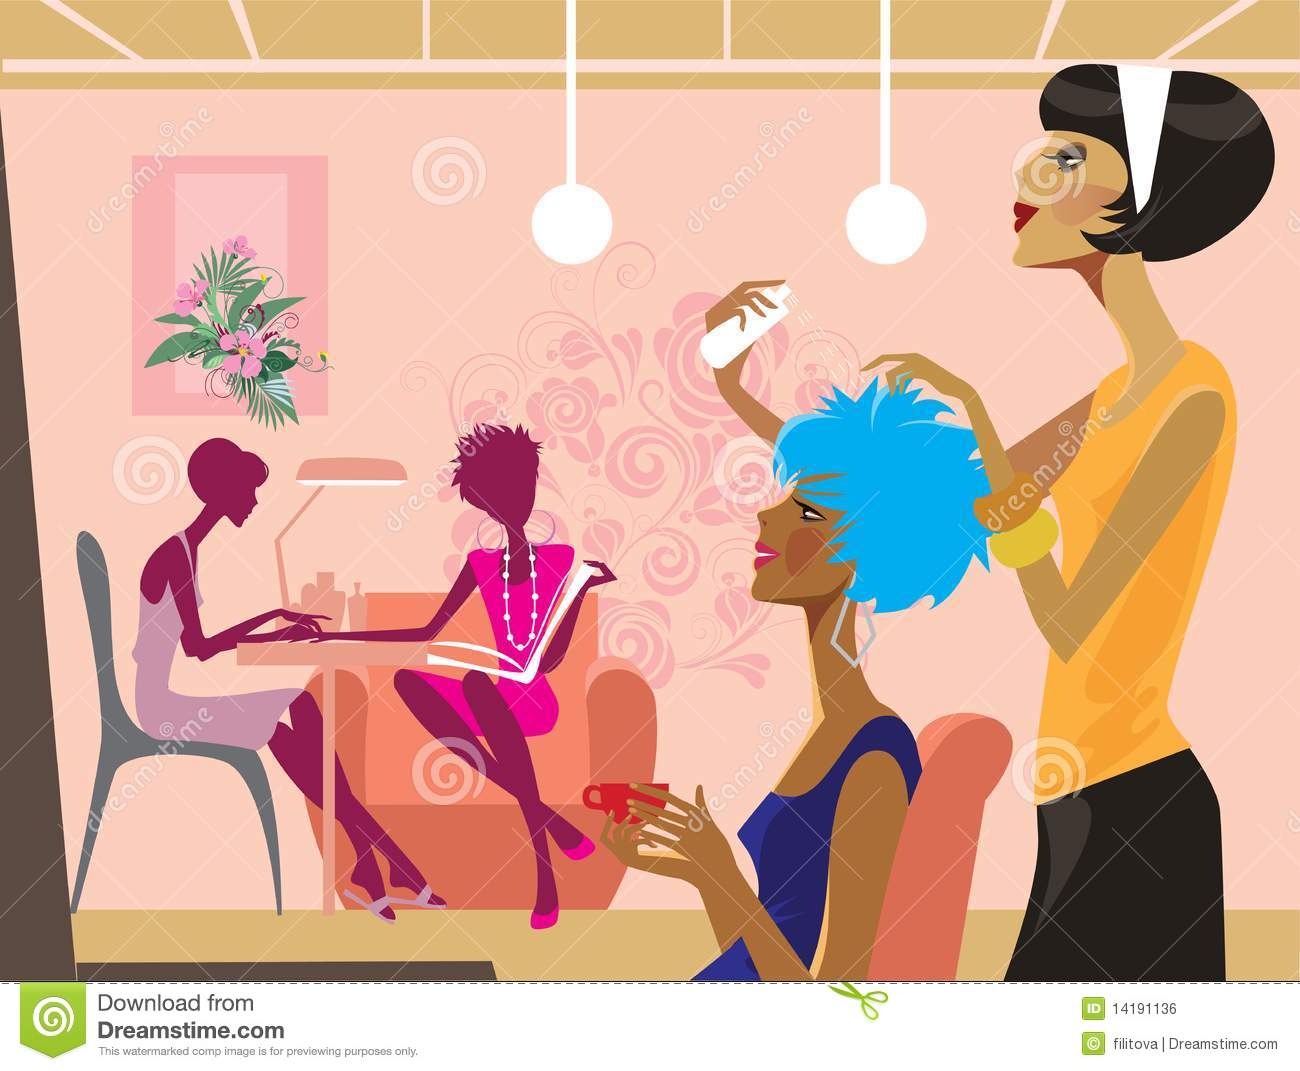 Illustration Of A Women In A Beauty Salon Getting A Hairstyle And